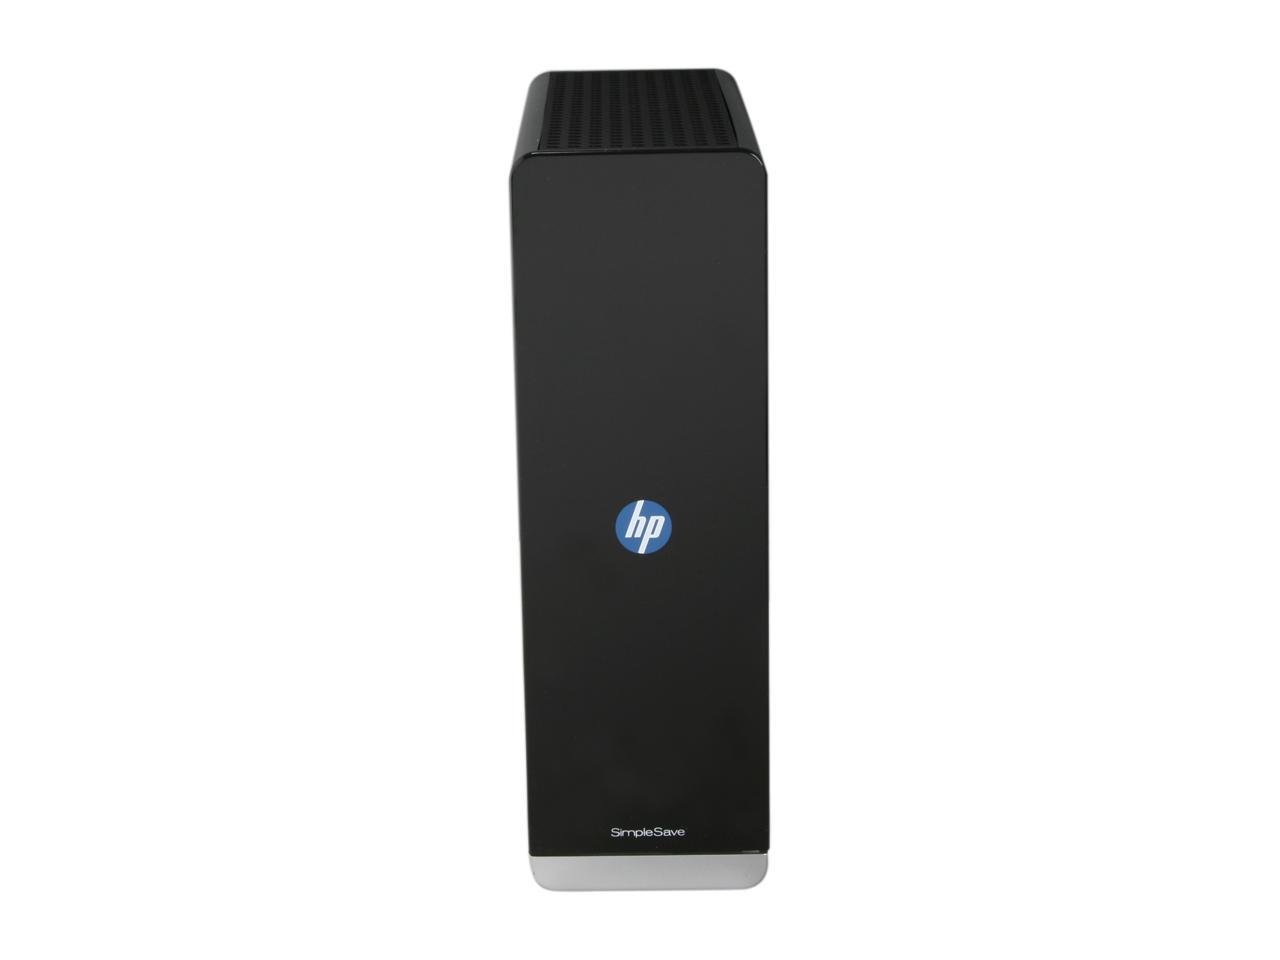 hp simplesave external hard drive recovery